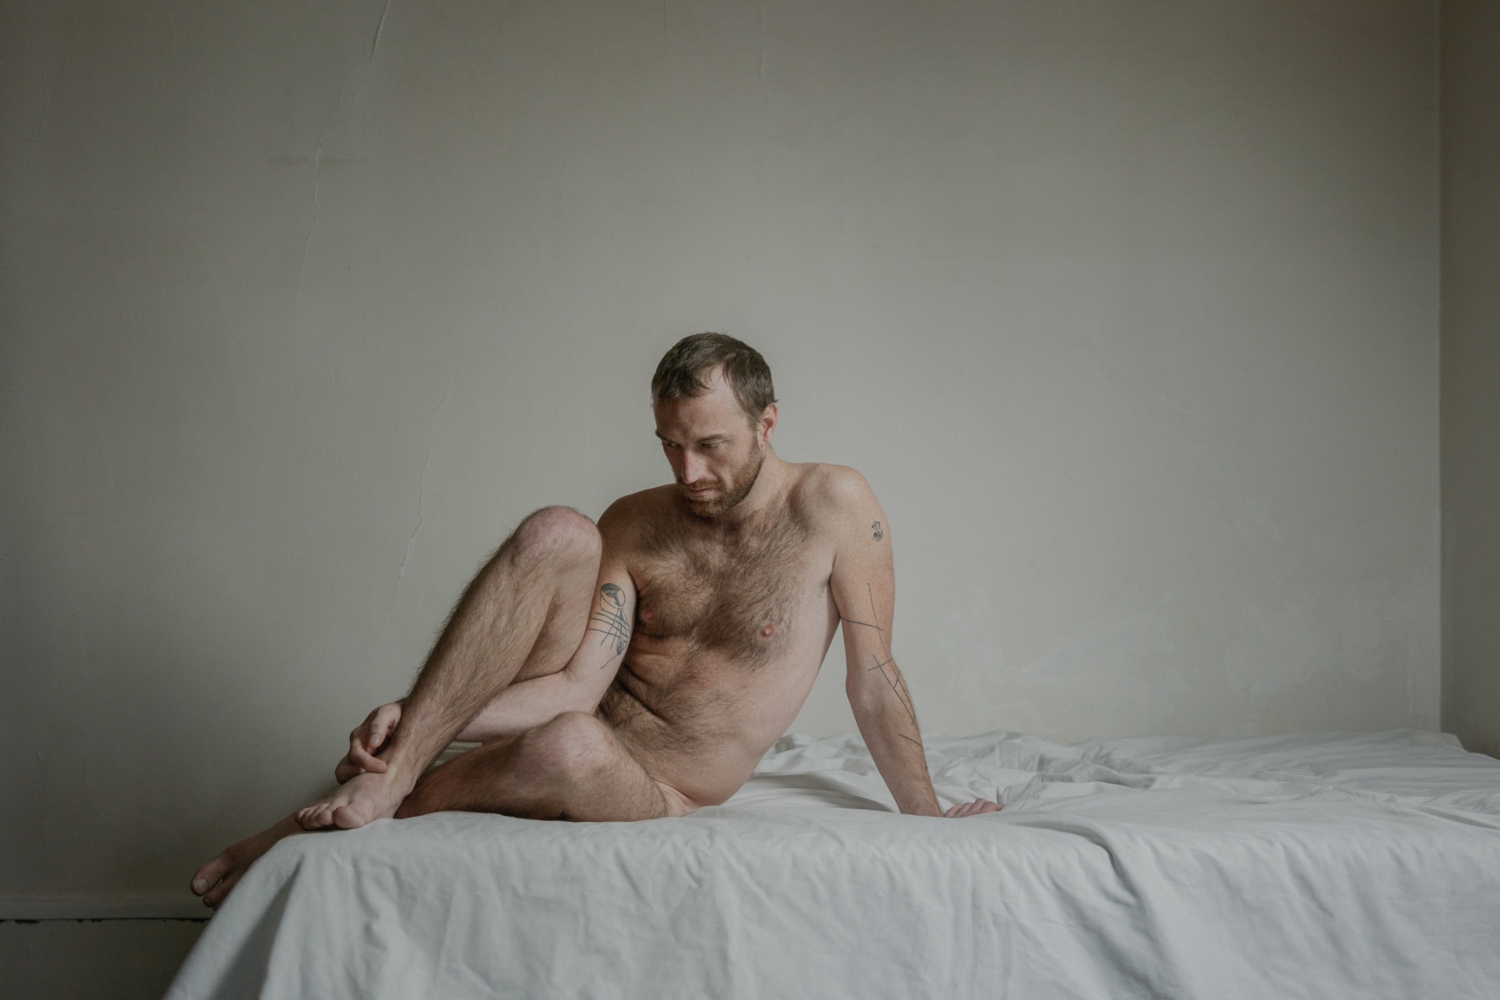 curtis stancil recommends nude poses for men pic